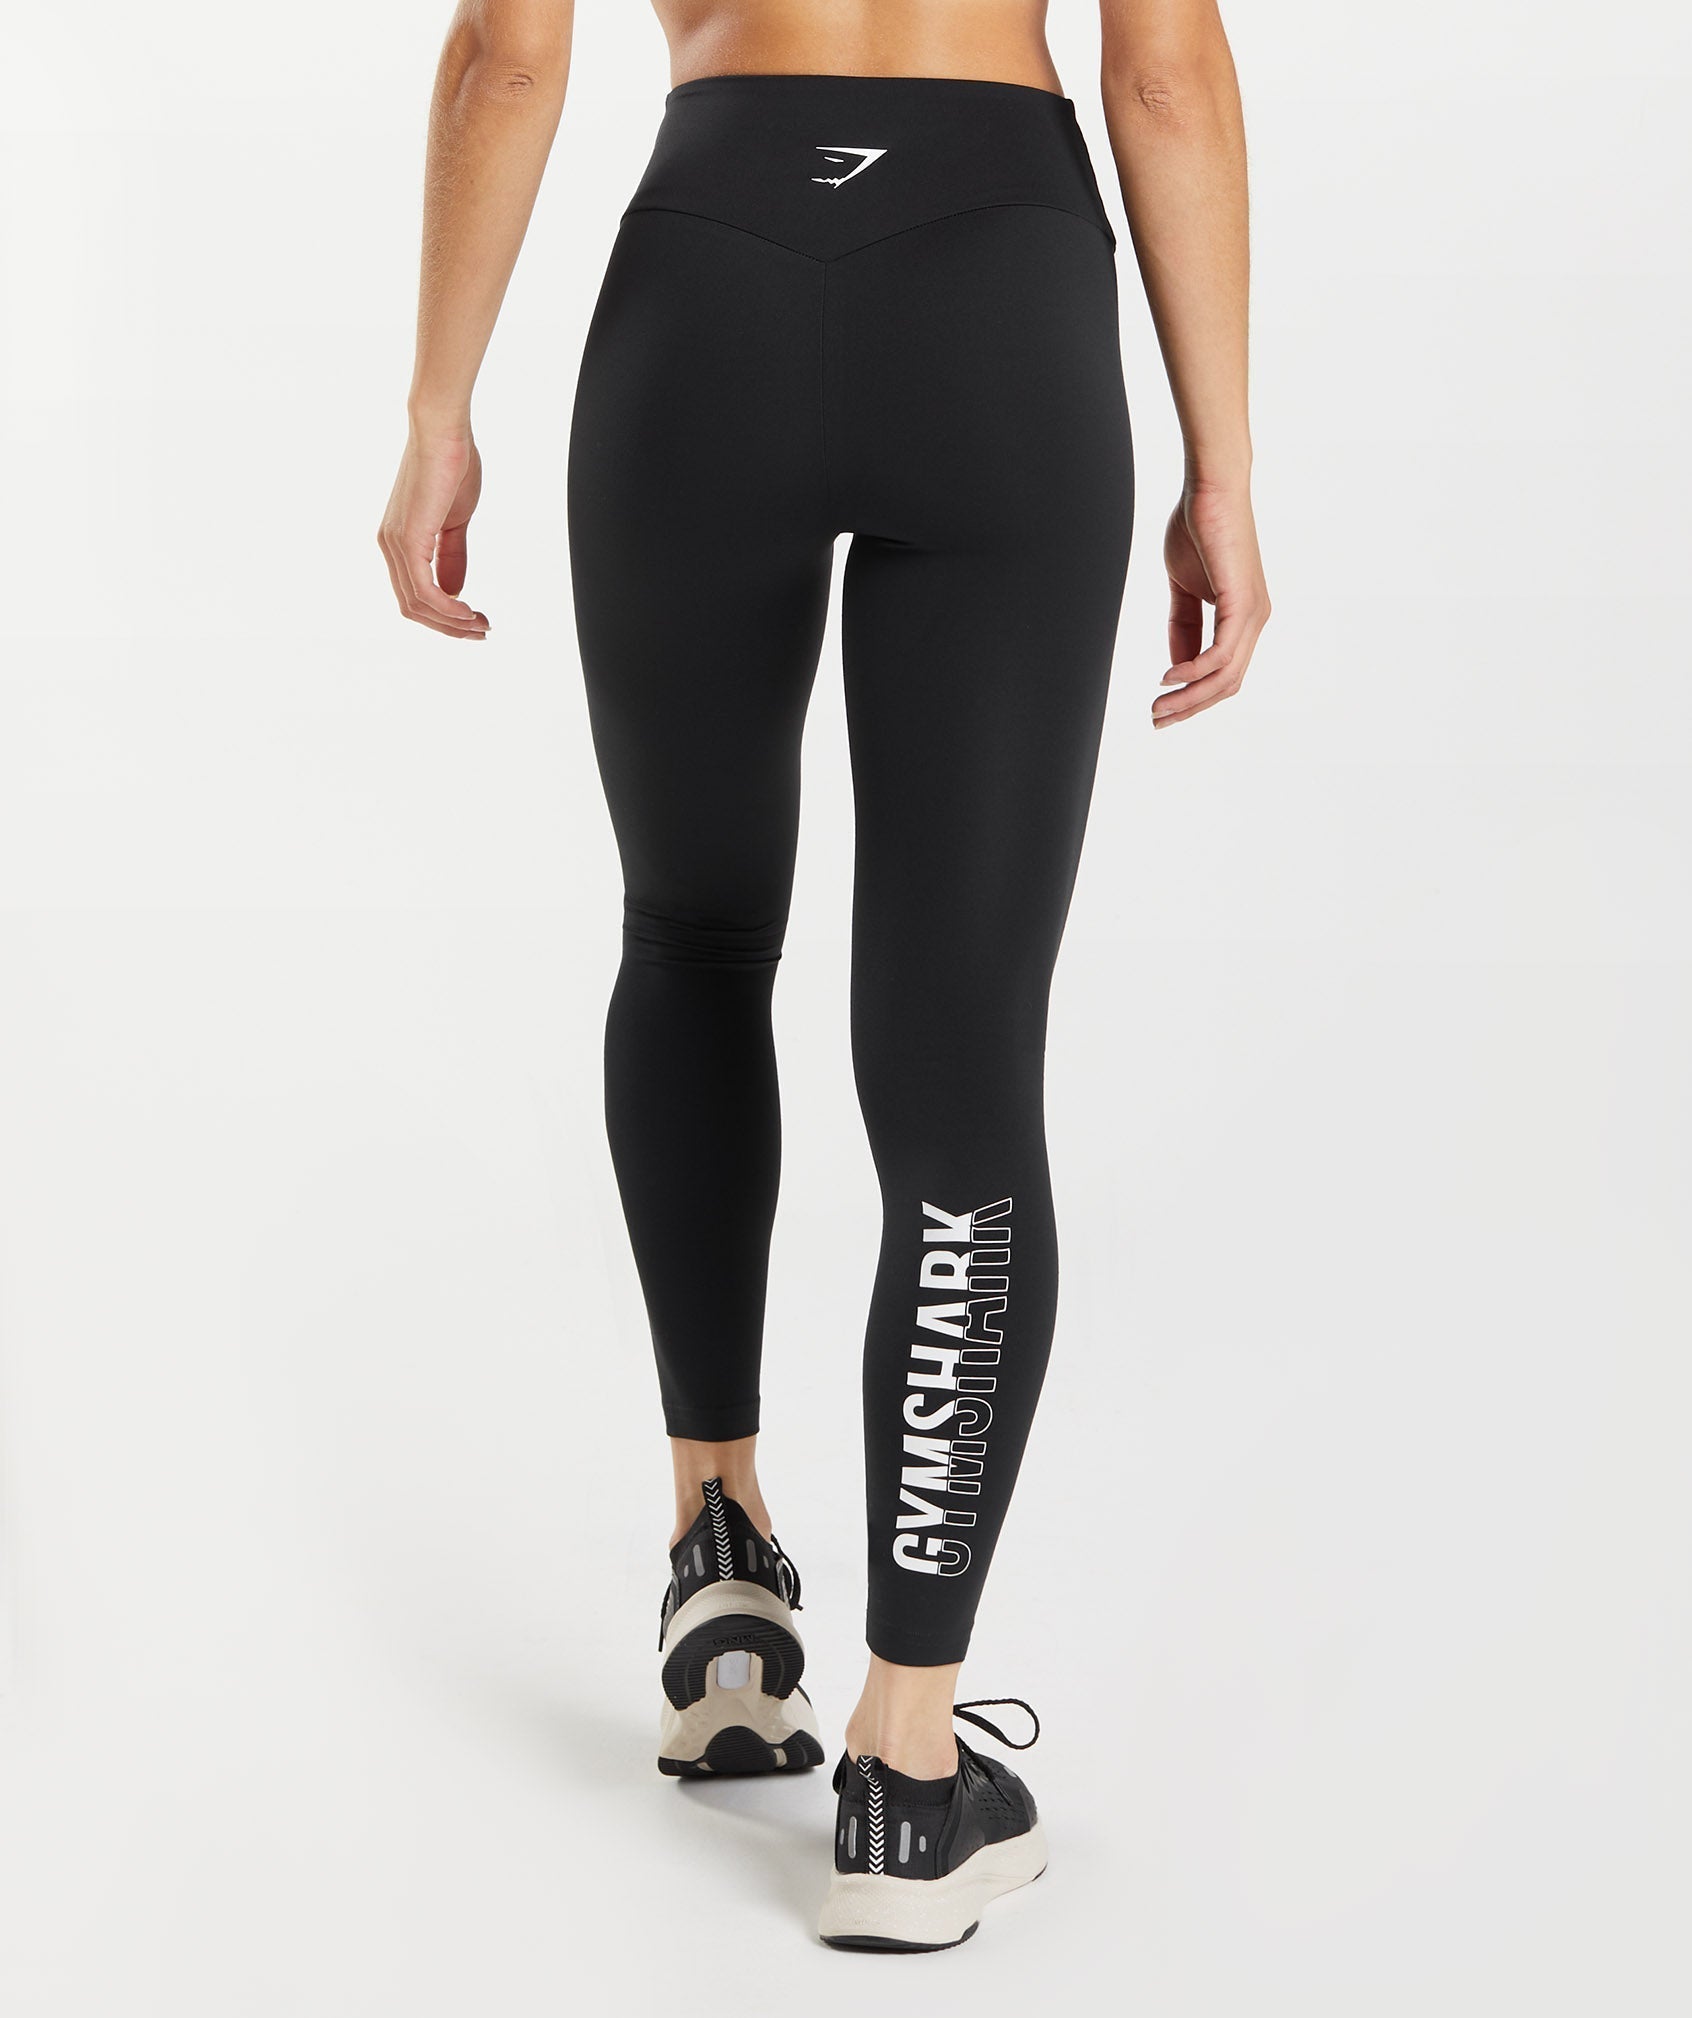 Brand new with tags Woman's GymShark Leggings size Medium, in Southampton,  Hampshire